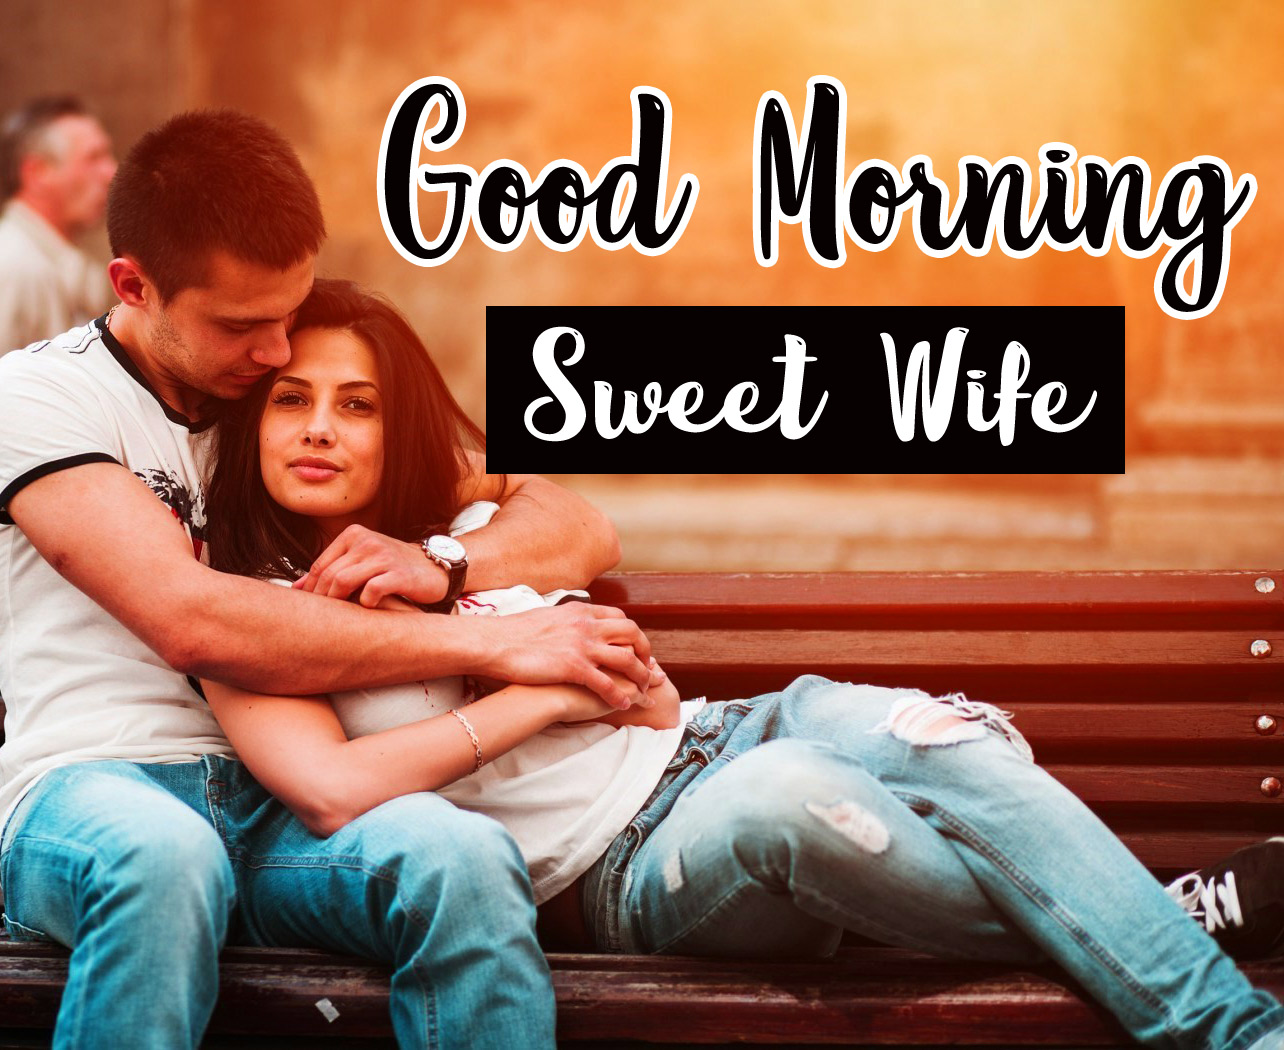 100+ Best Good morning wishes and images for wife - Good Morning ...